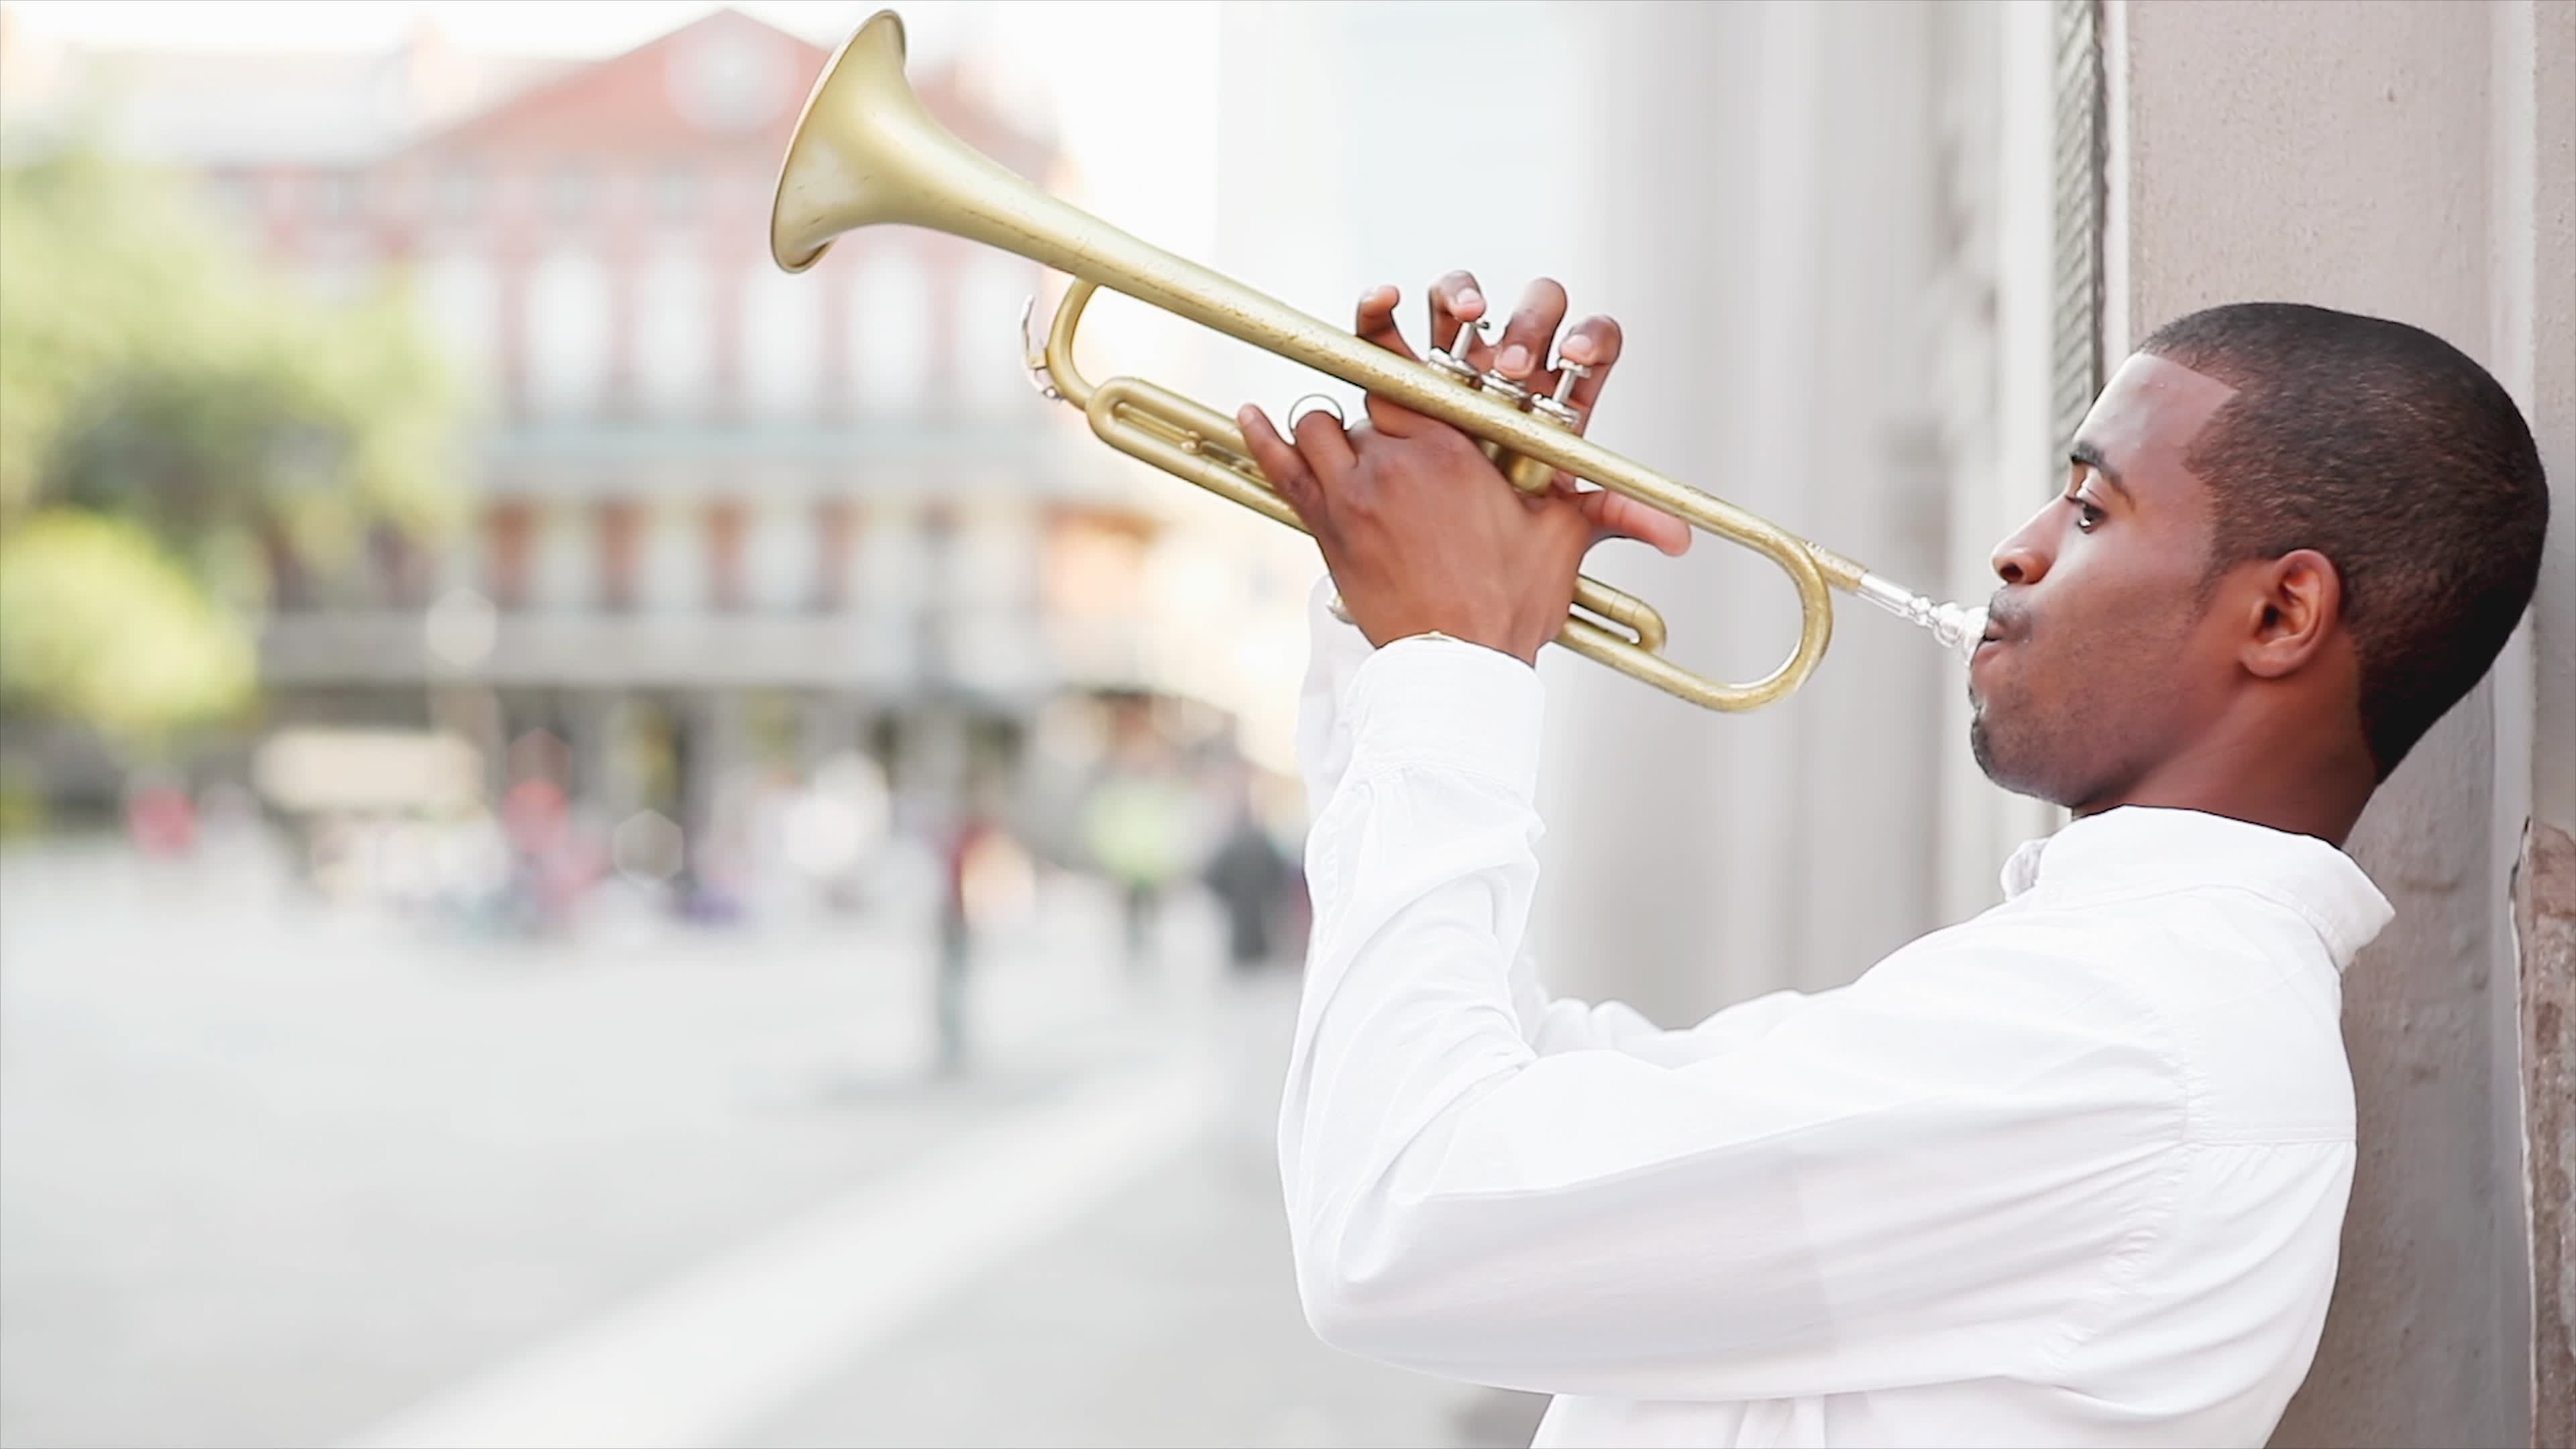 Trumpet: A brass instrument, Producing sound by blowing air through closed lips, Trumpeter. 3840x2160 4K Wallpaper.